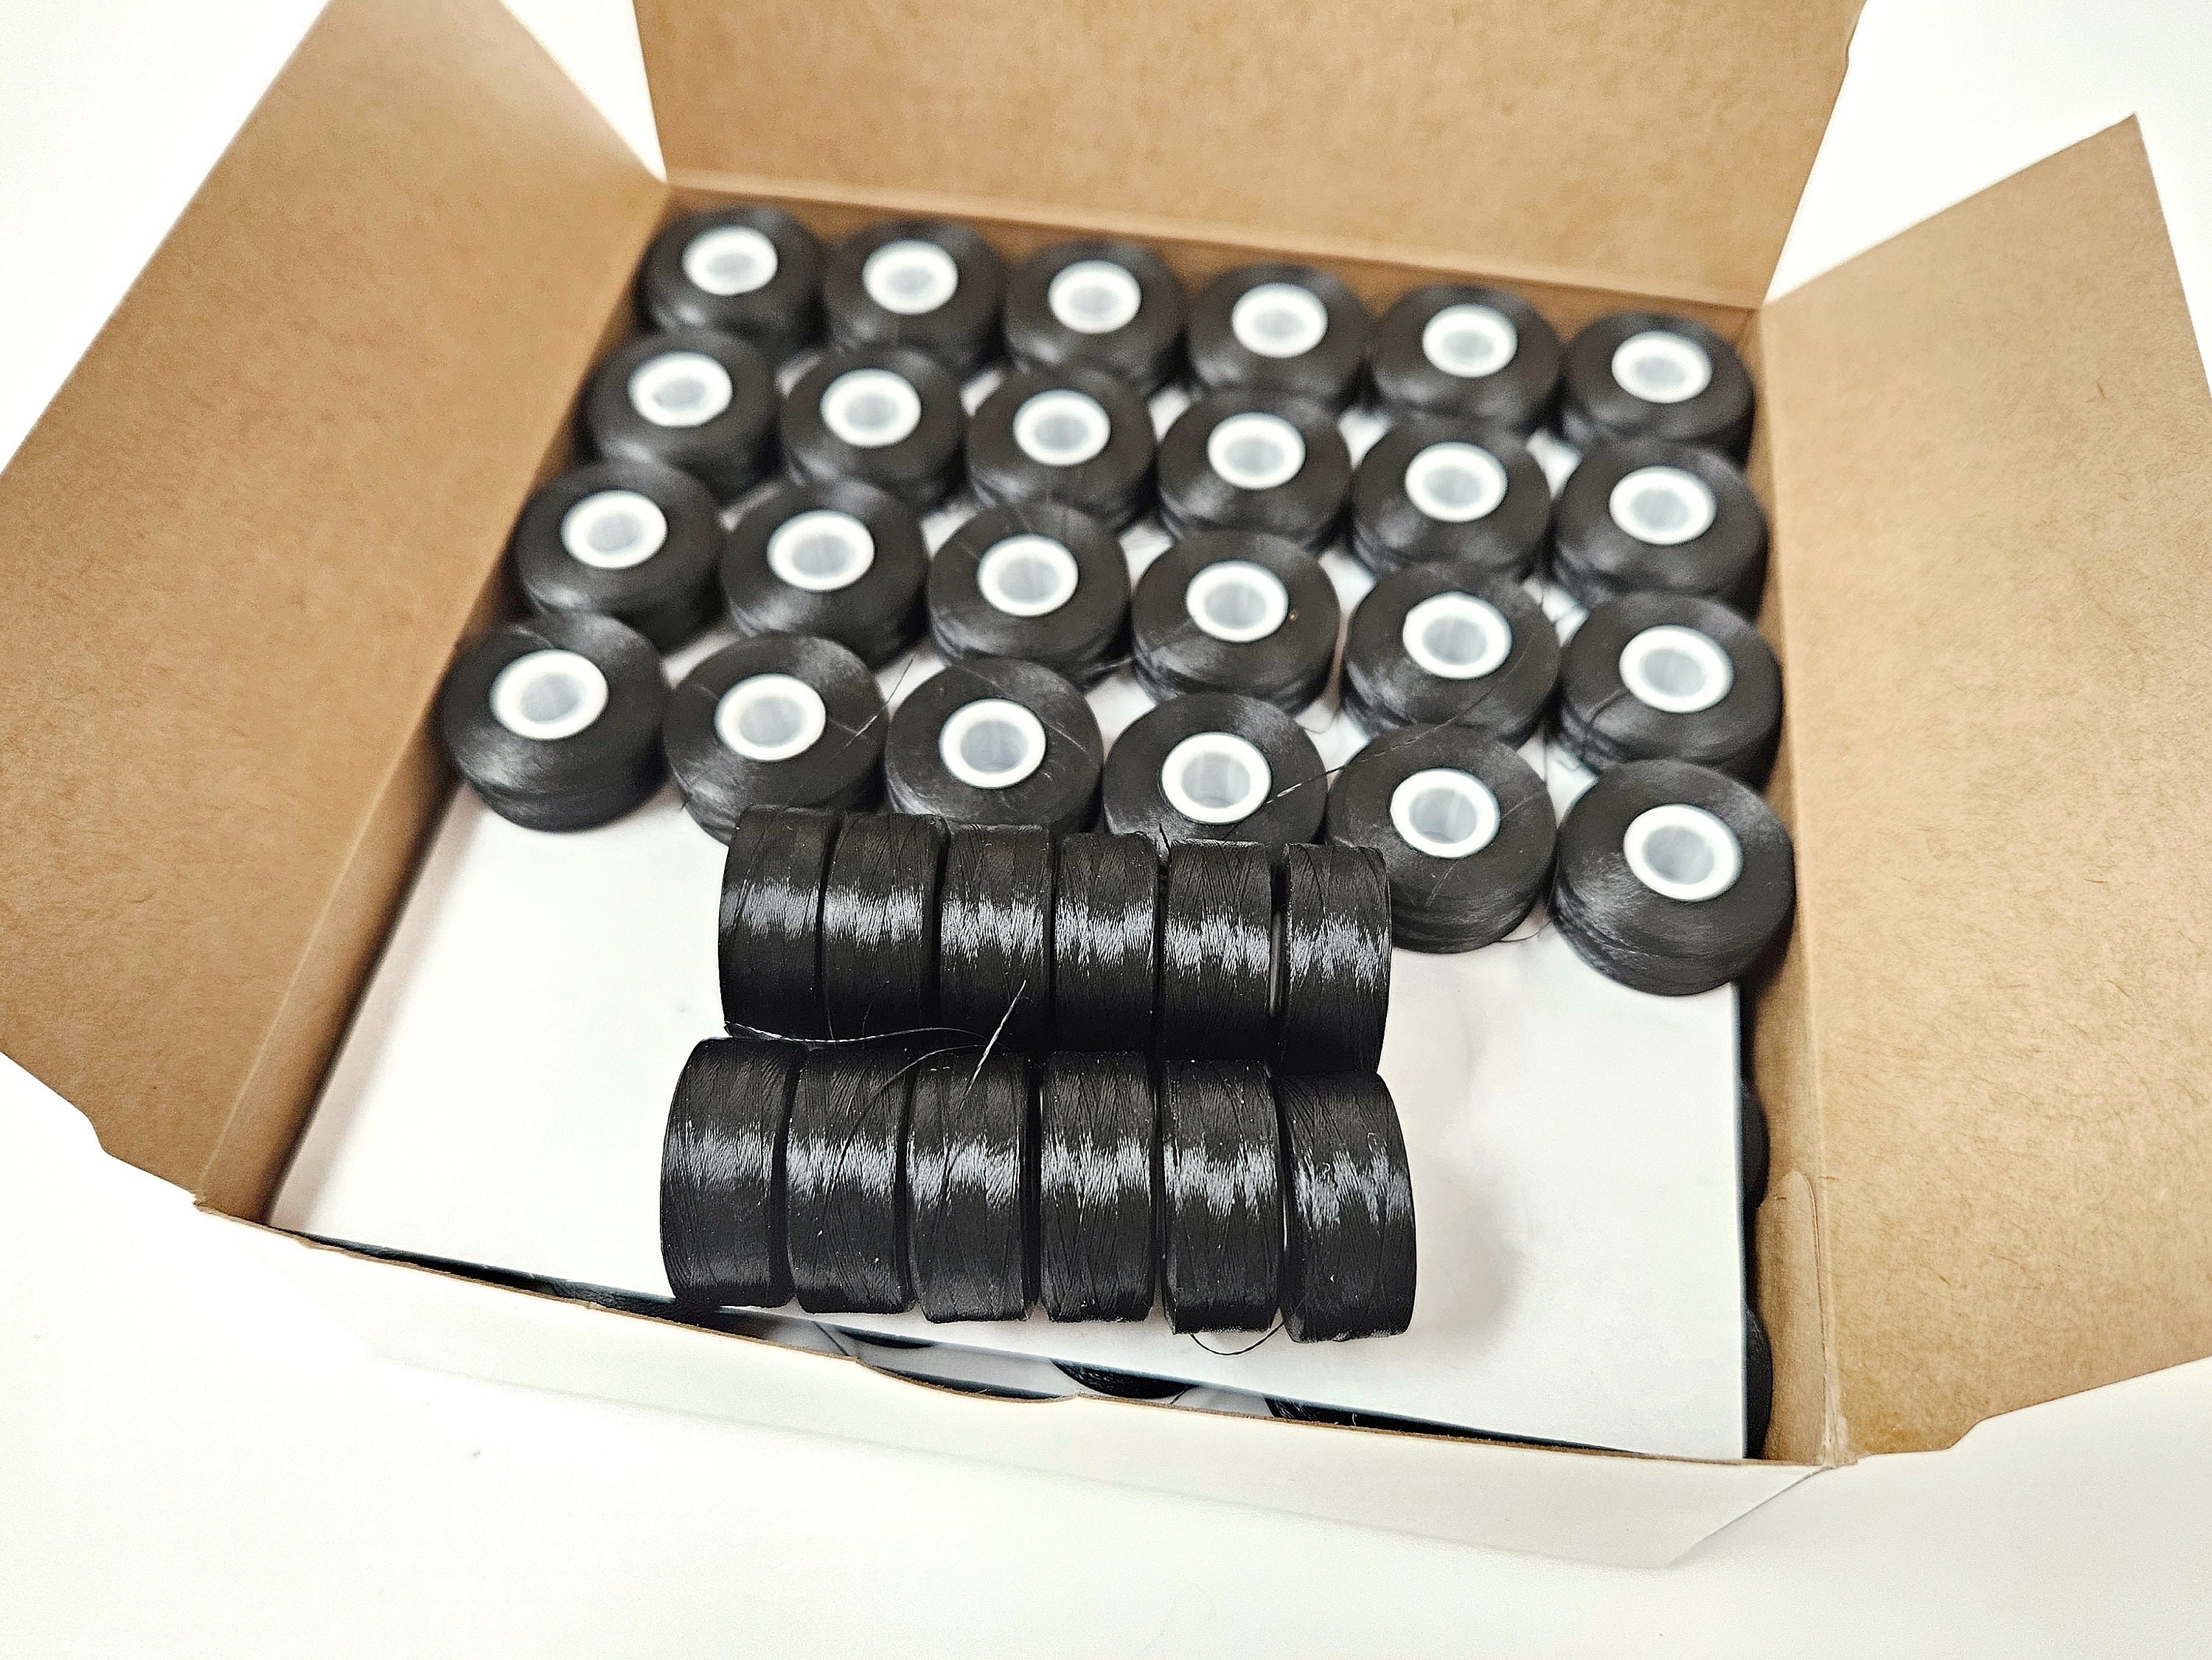  144 Black/White Prewound Bobbins for Brother Embroidery Machine  Size A (156) 90 Weight